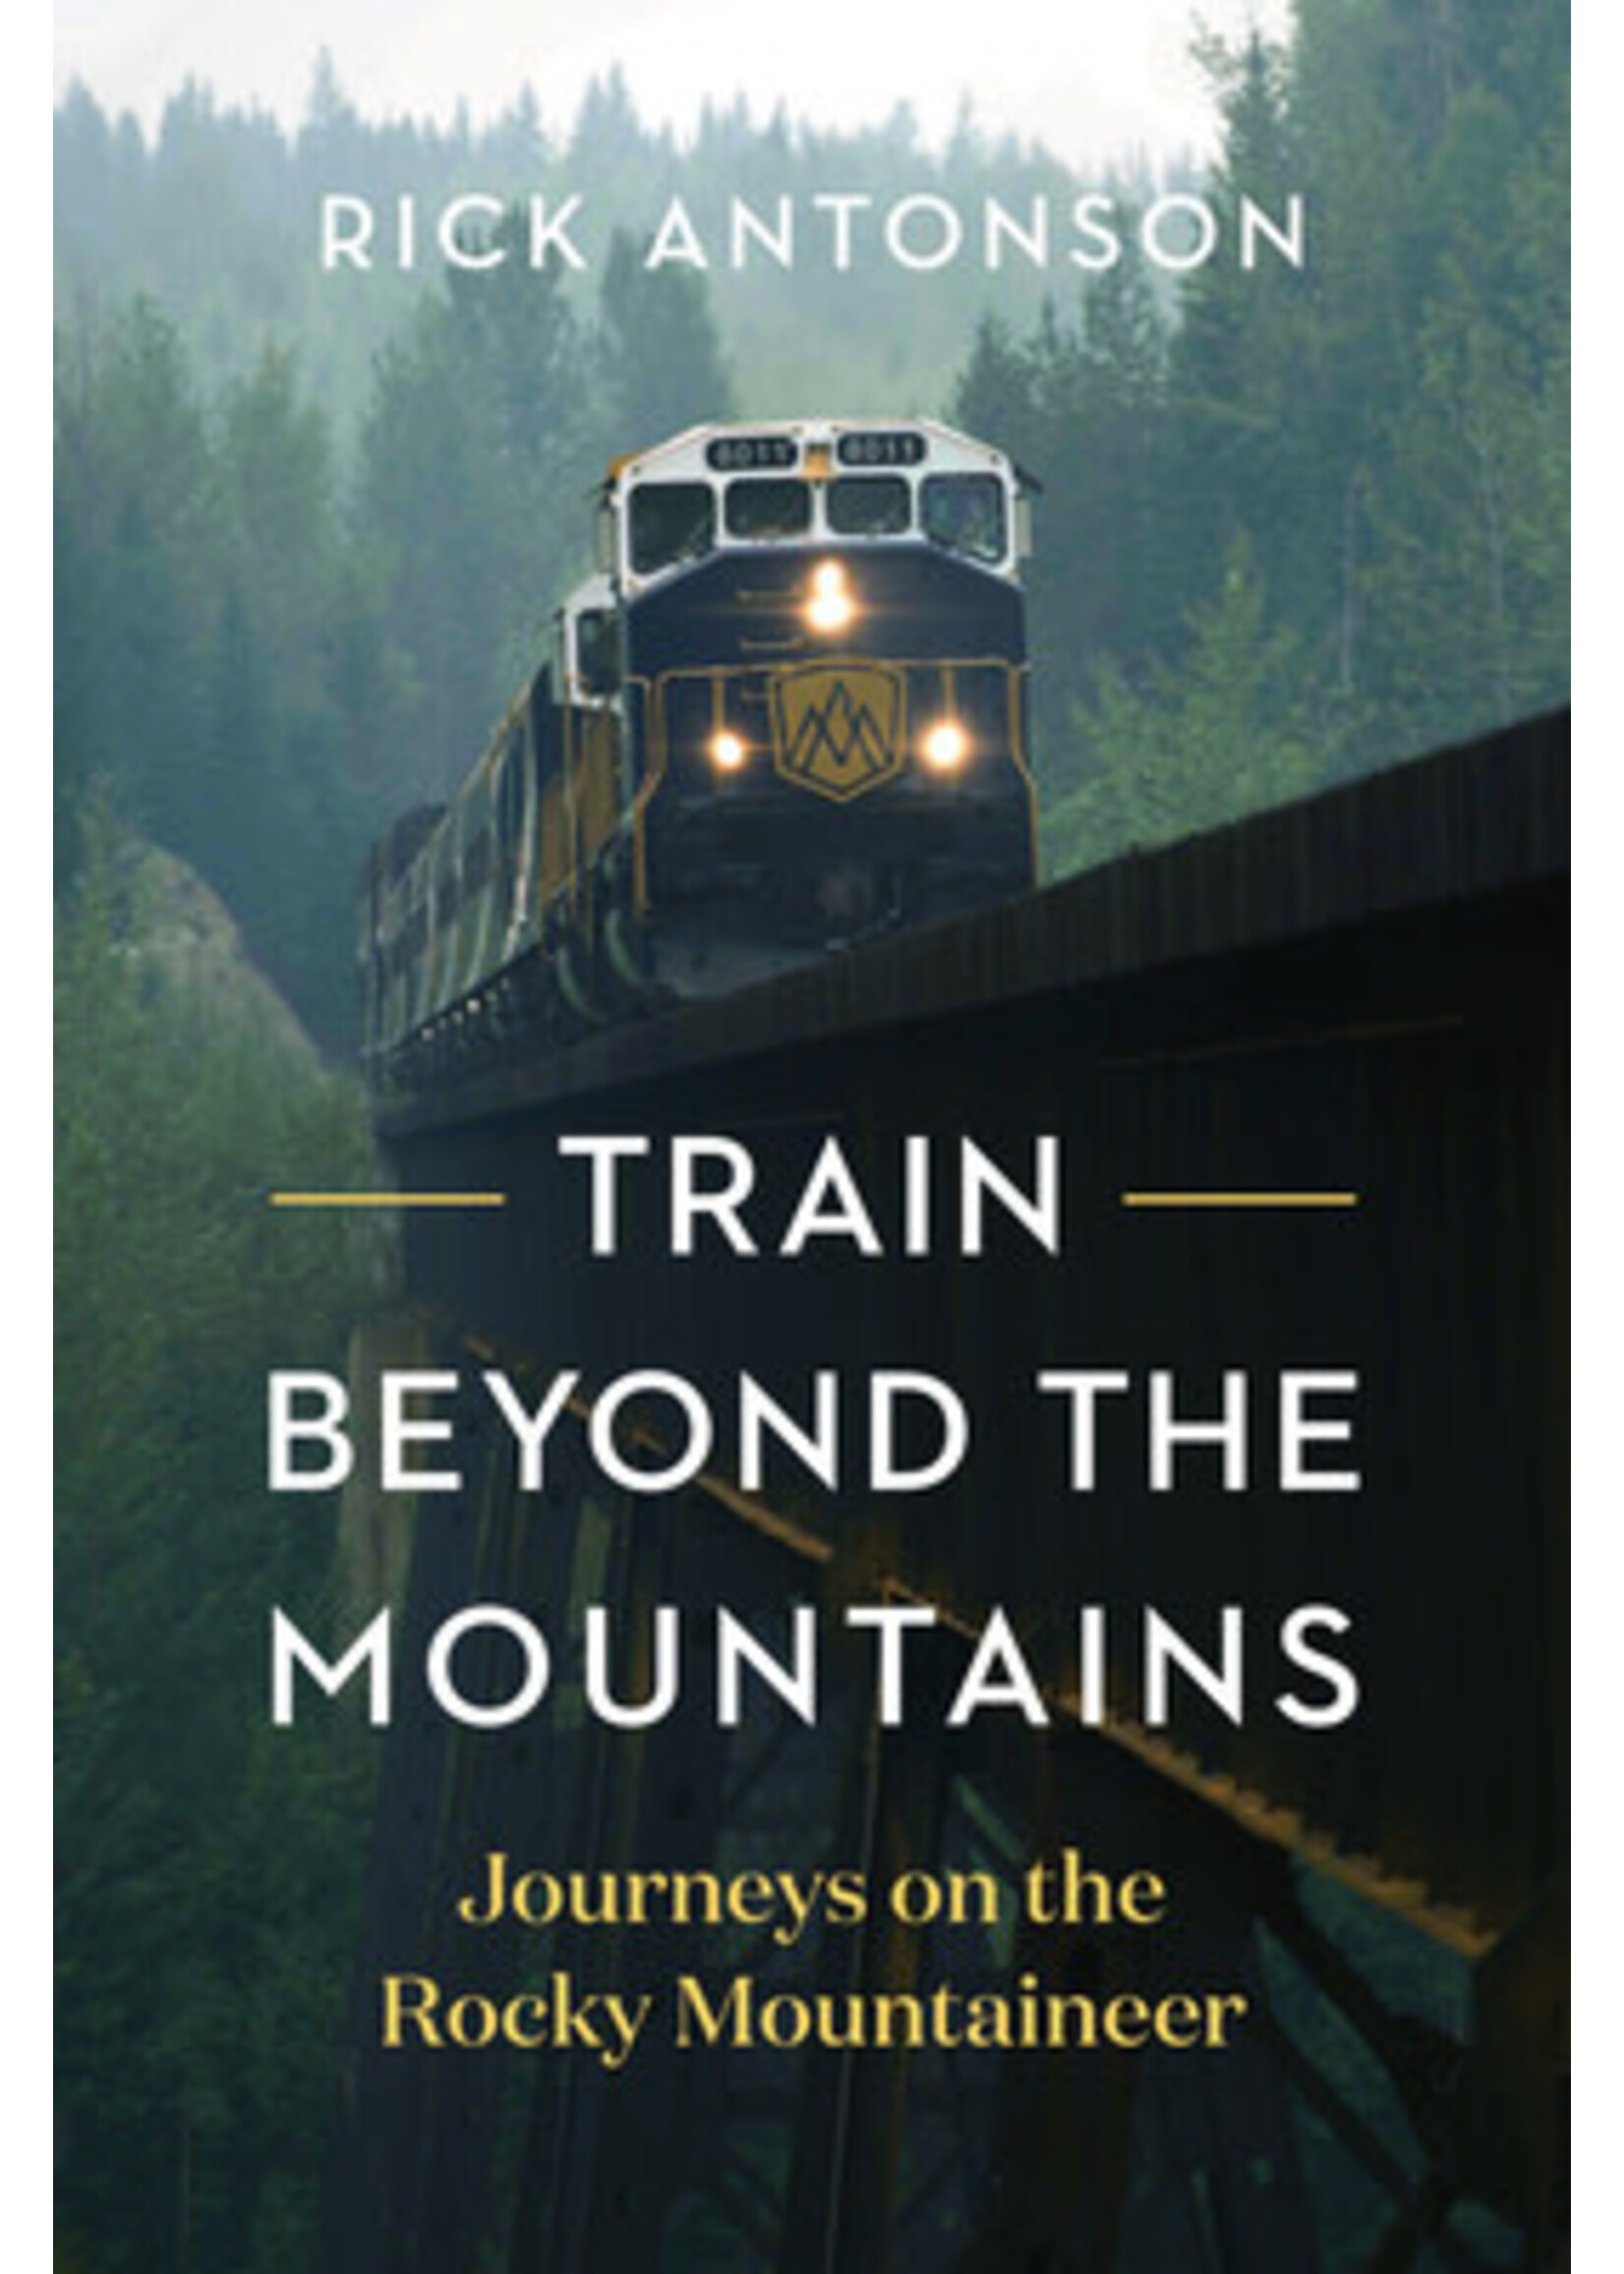 Train Beyond the Mountains: Journeys on the Rocky Mountaineer by Rick Antonson